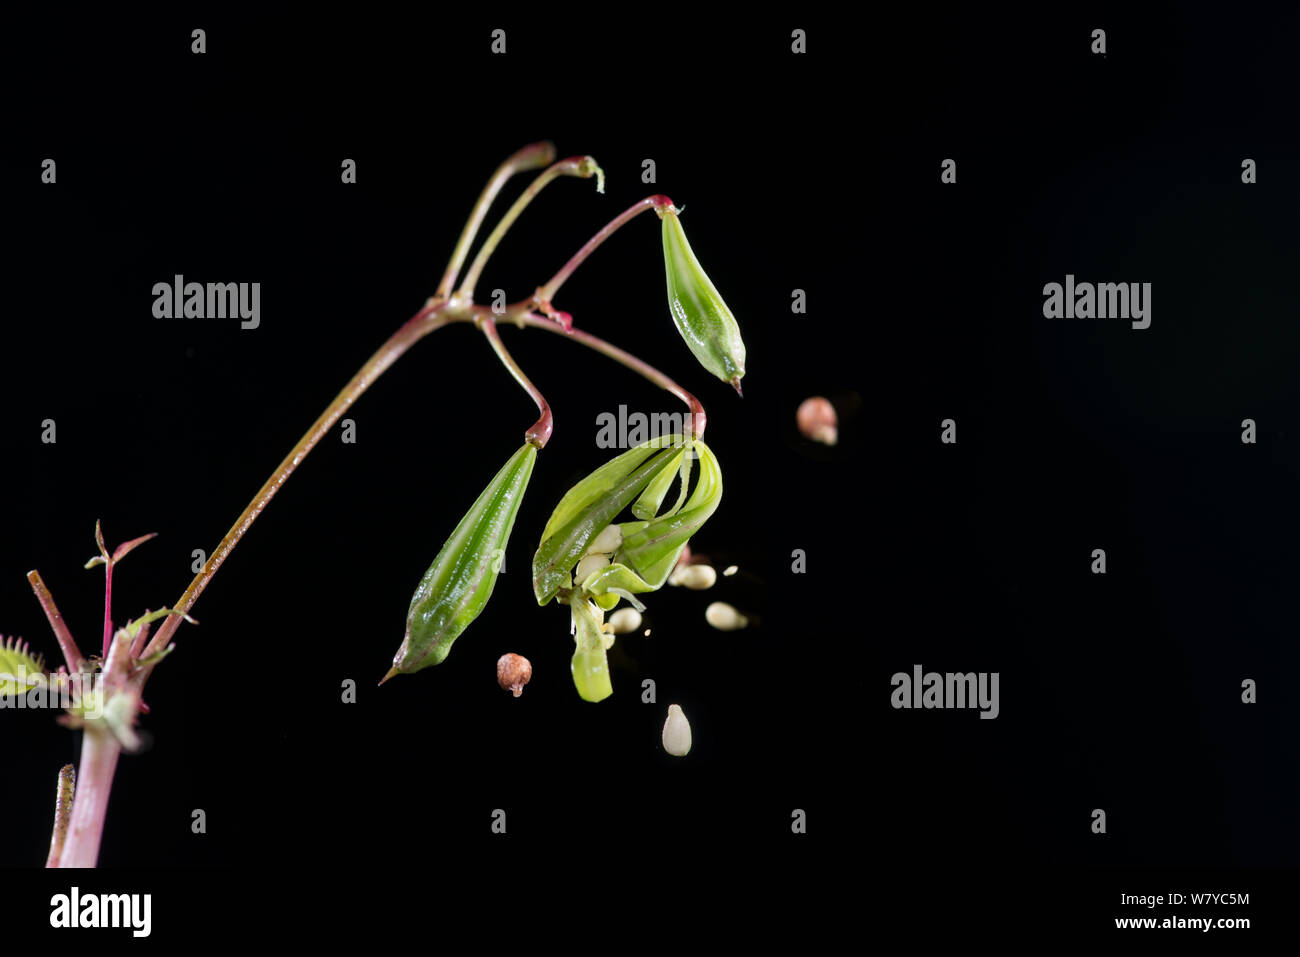 Himalayan Balsam (Impatiens glandulifera) seeds bursting from pod. Ripe seed pods do this in the wild when hit by rain drops. Digital composite. Stock Photo